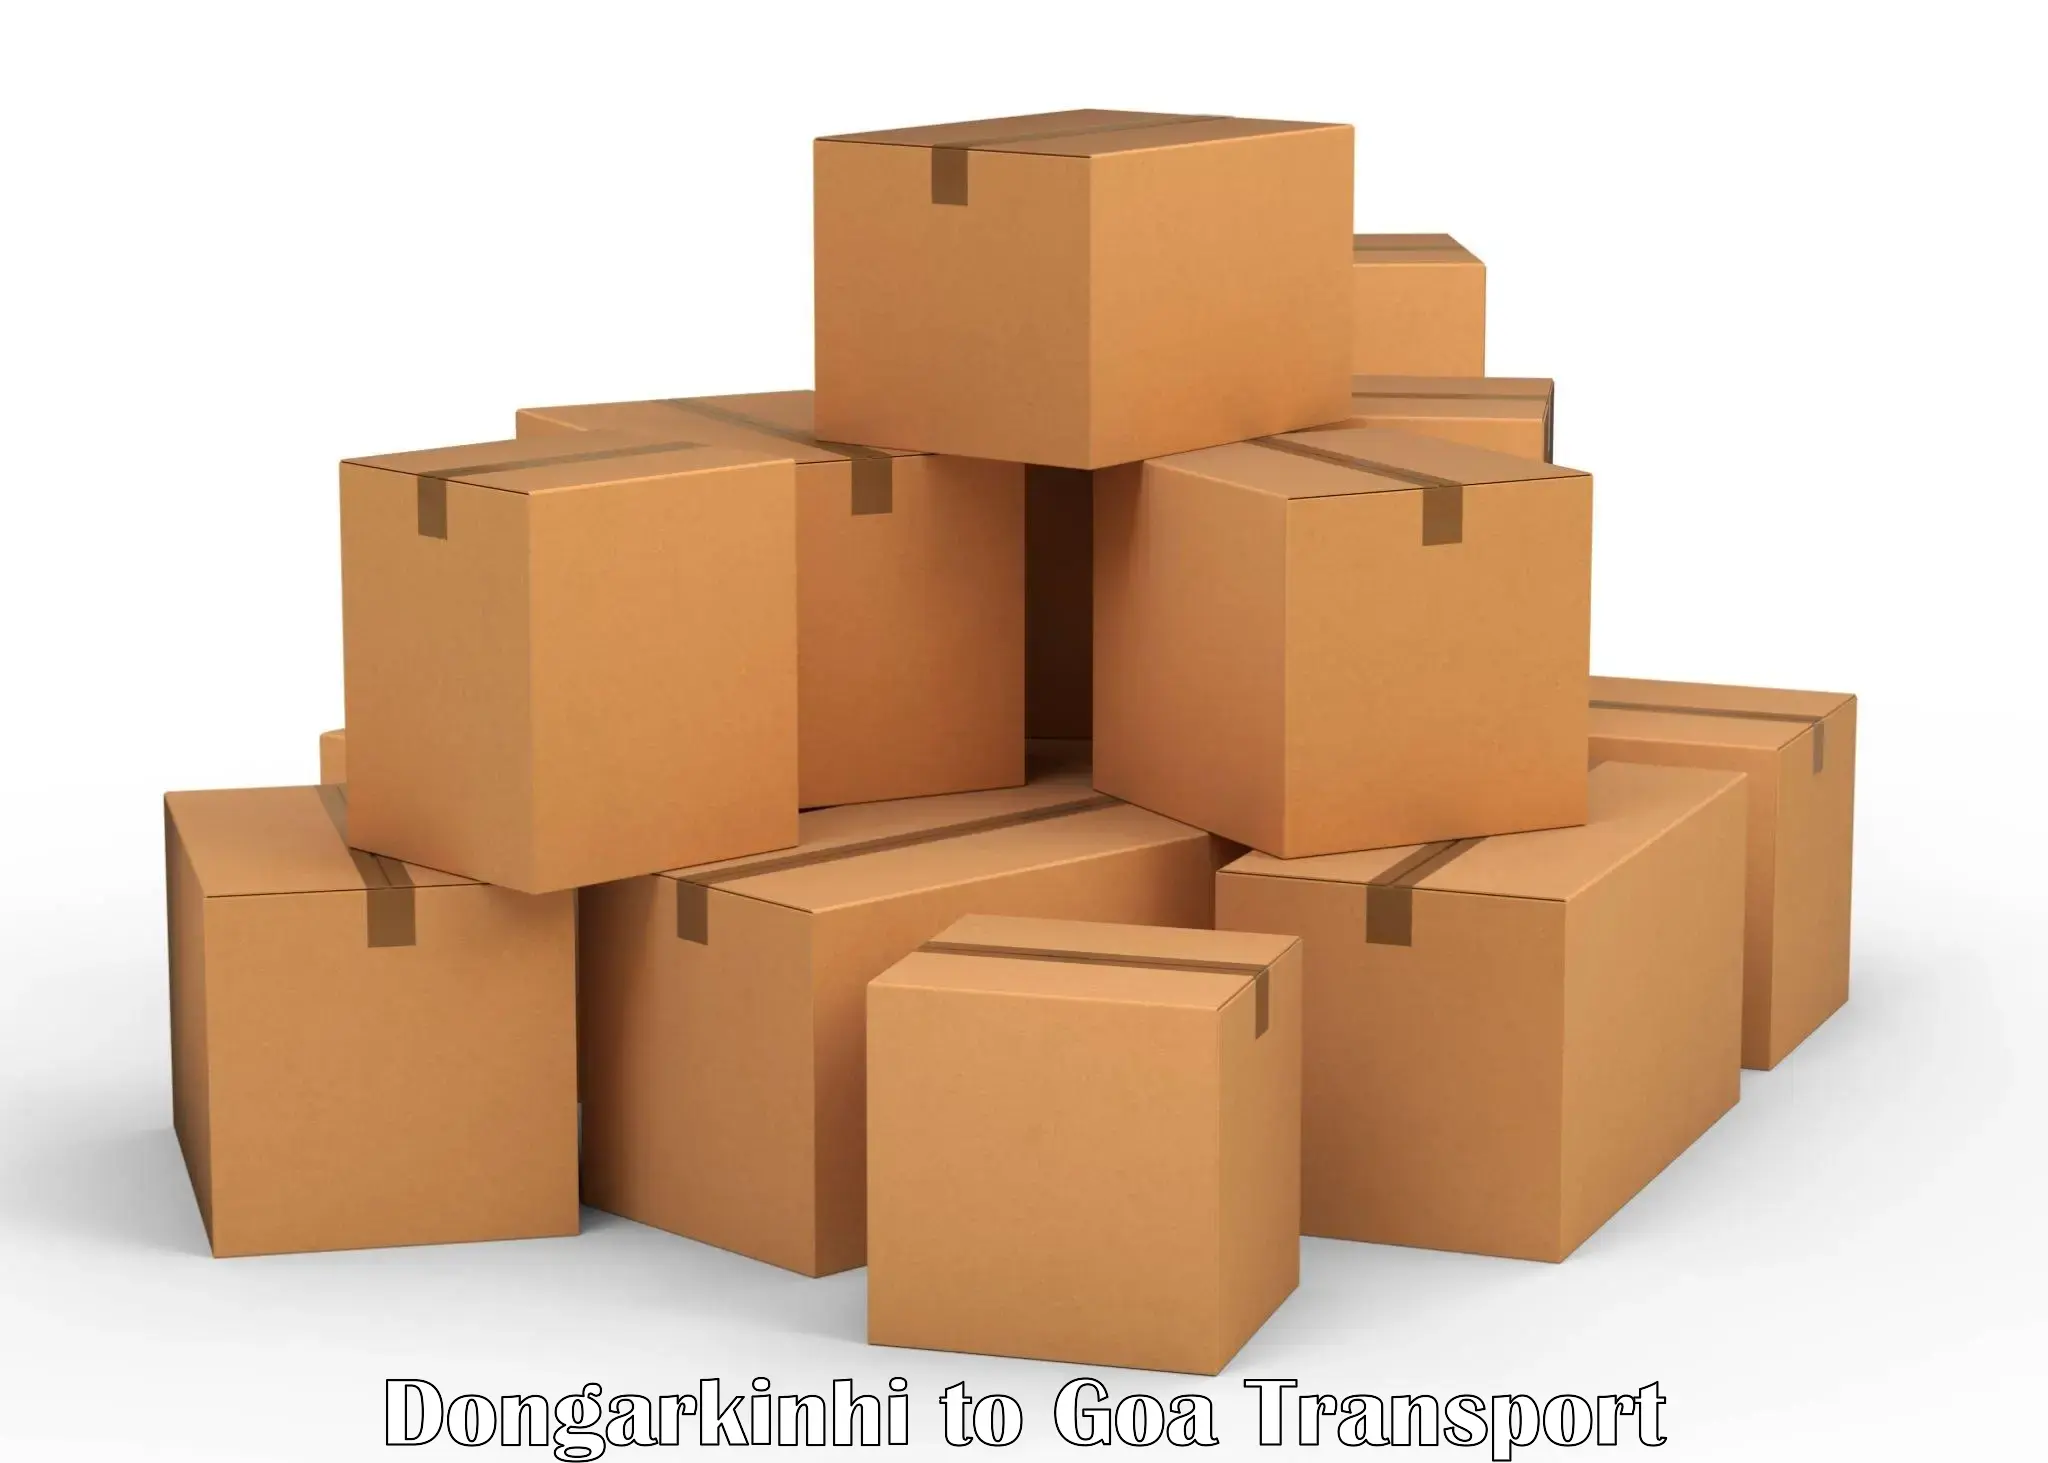 Container transportation services in Dongarkinhi to Goa University